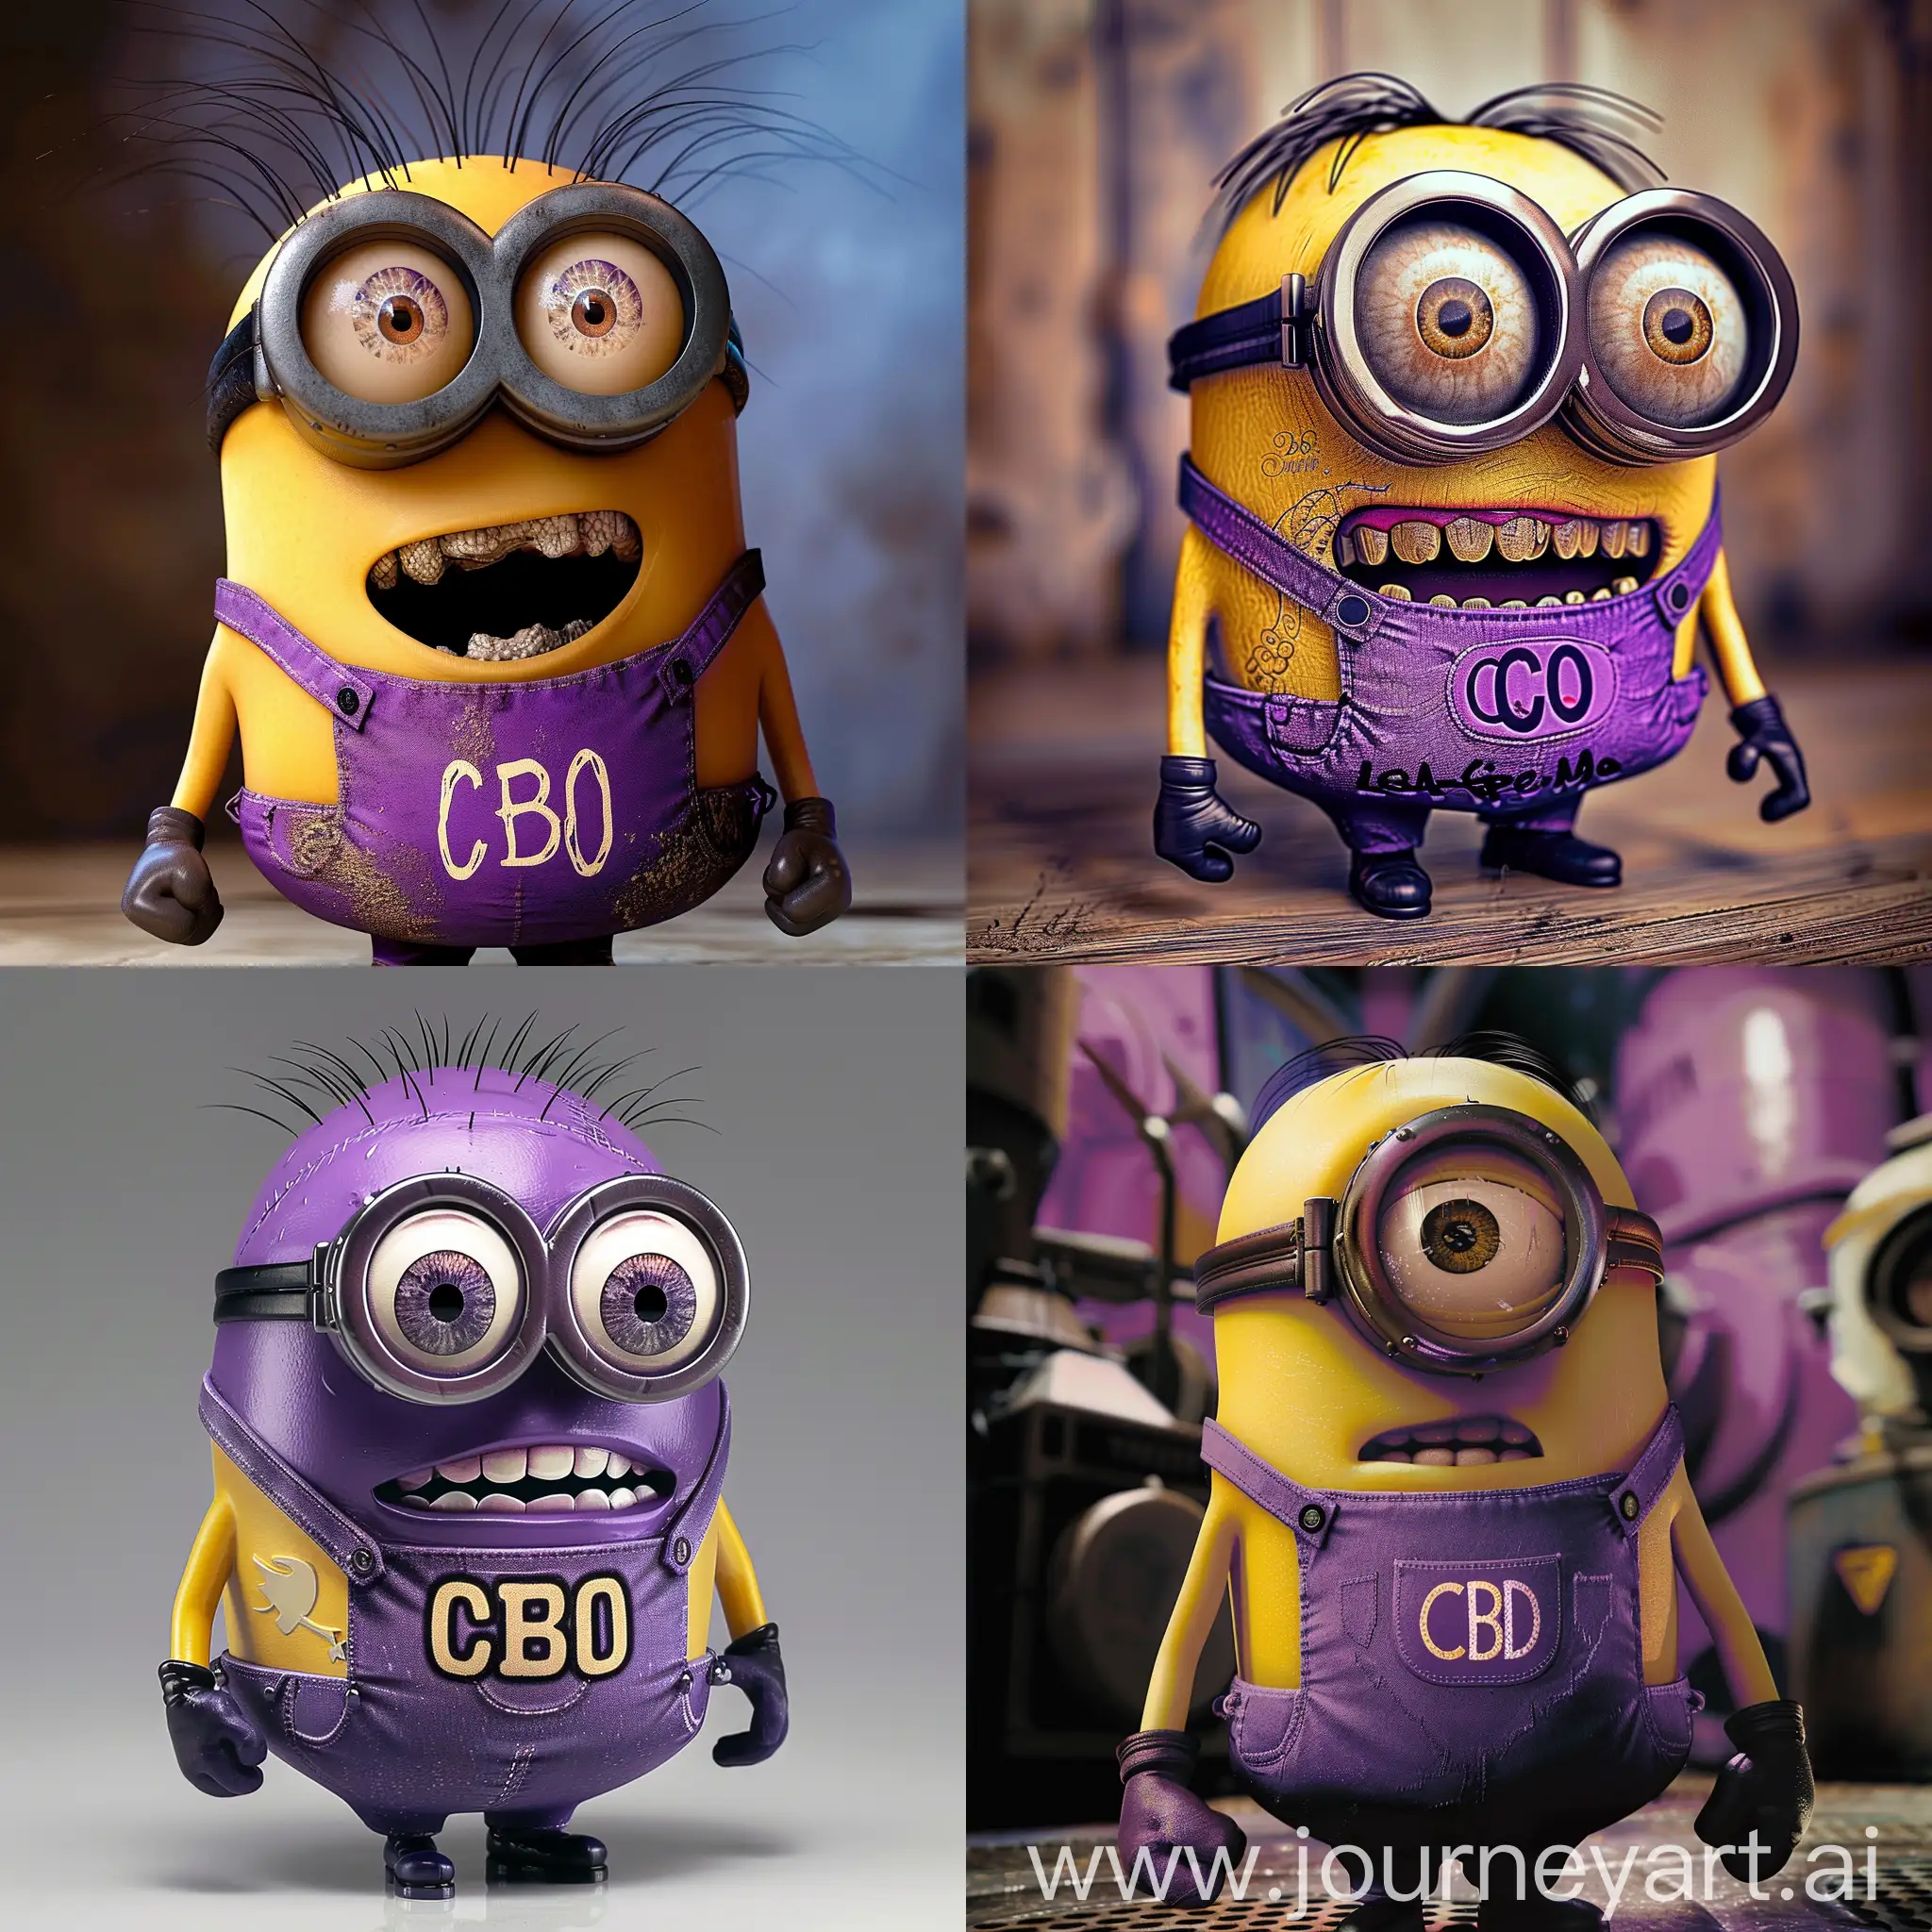 Evil-Purple-Minion-from-Despicable-Me-with-CBO-TShirt